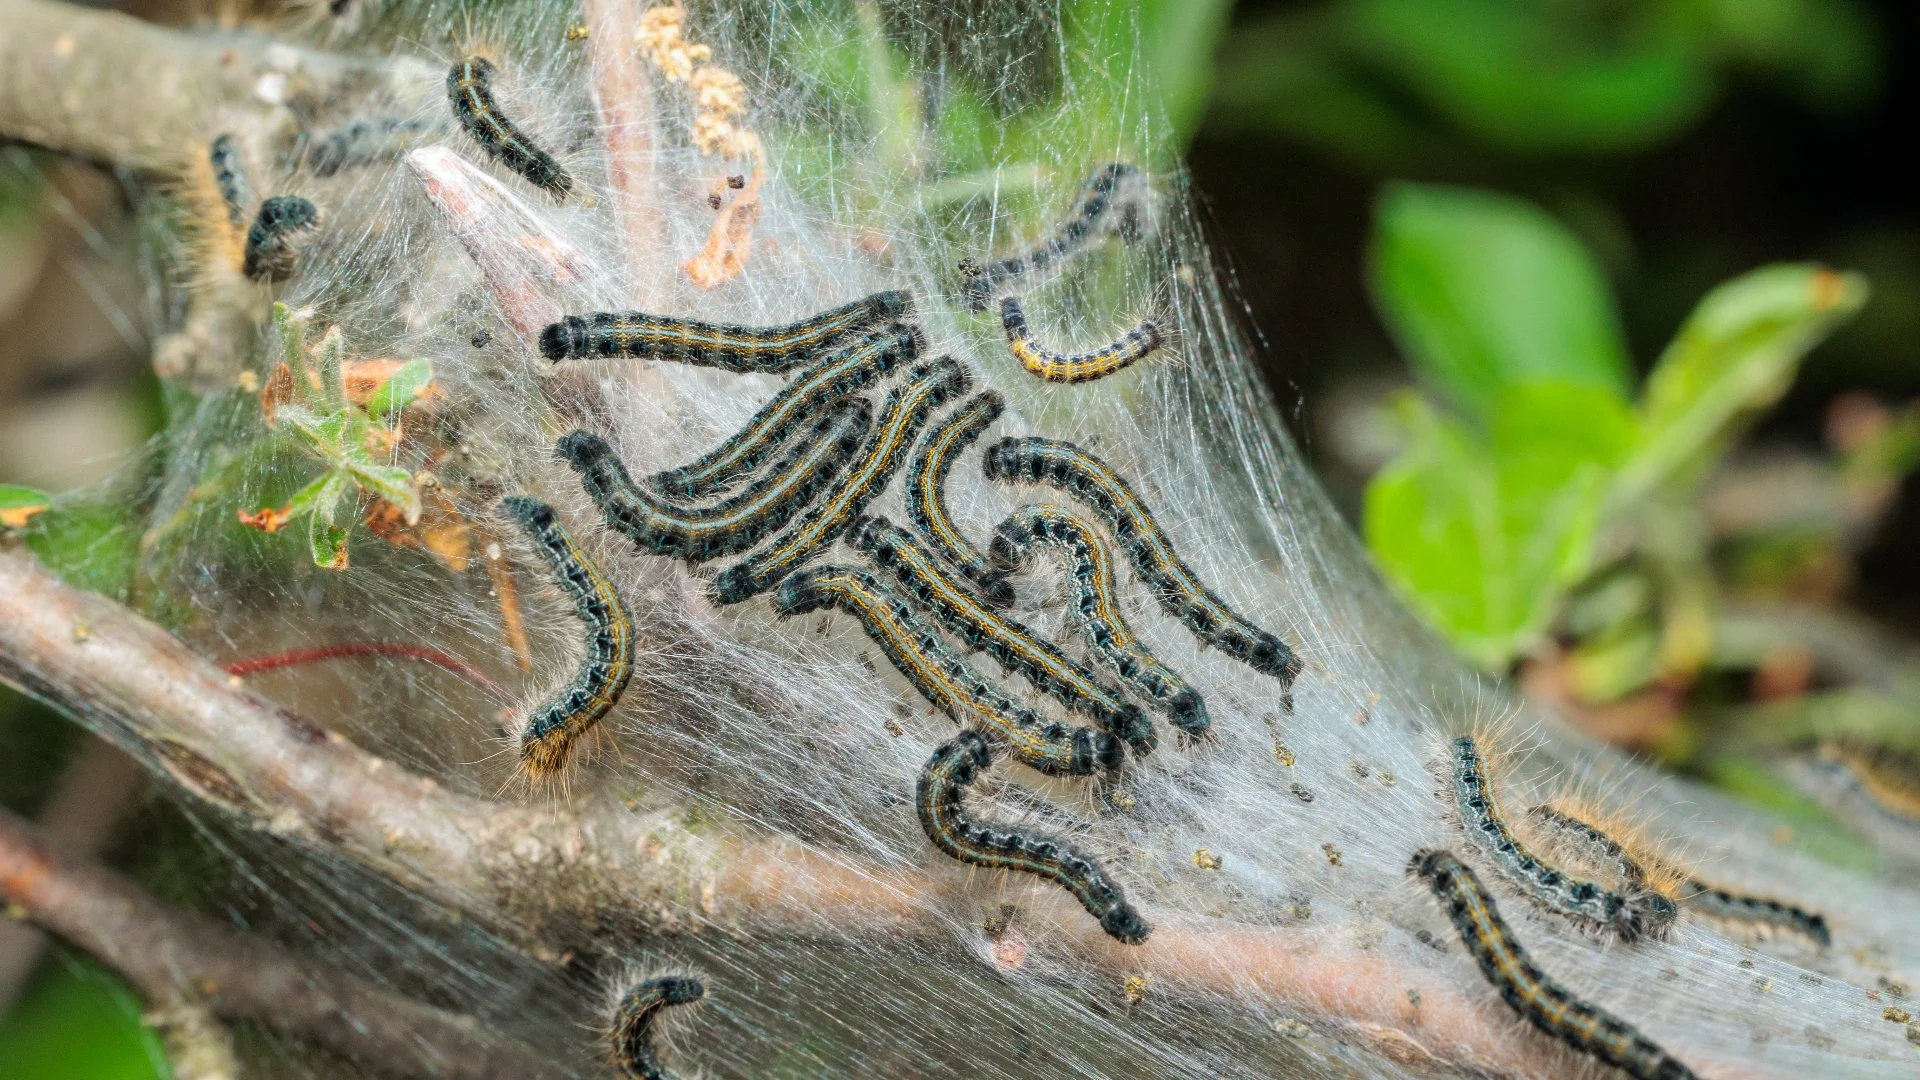 Tent Caterpillars Can Damage Your Plants! Watch Out for Them This Summer!